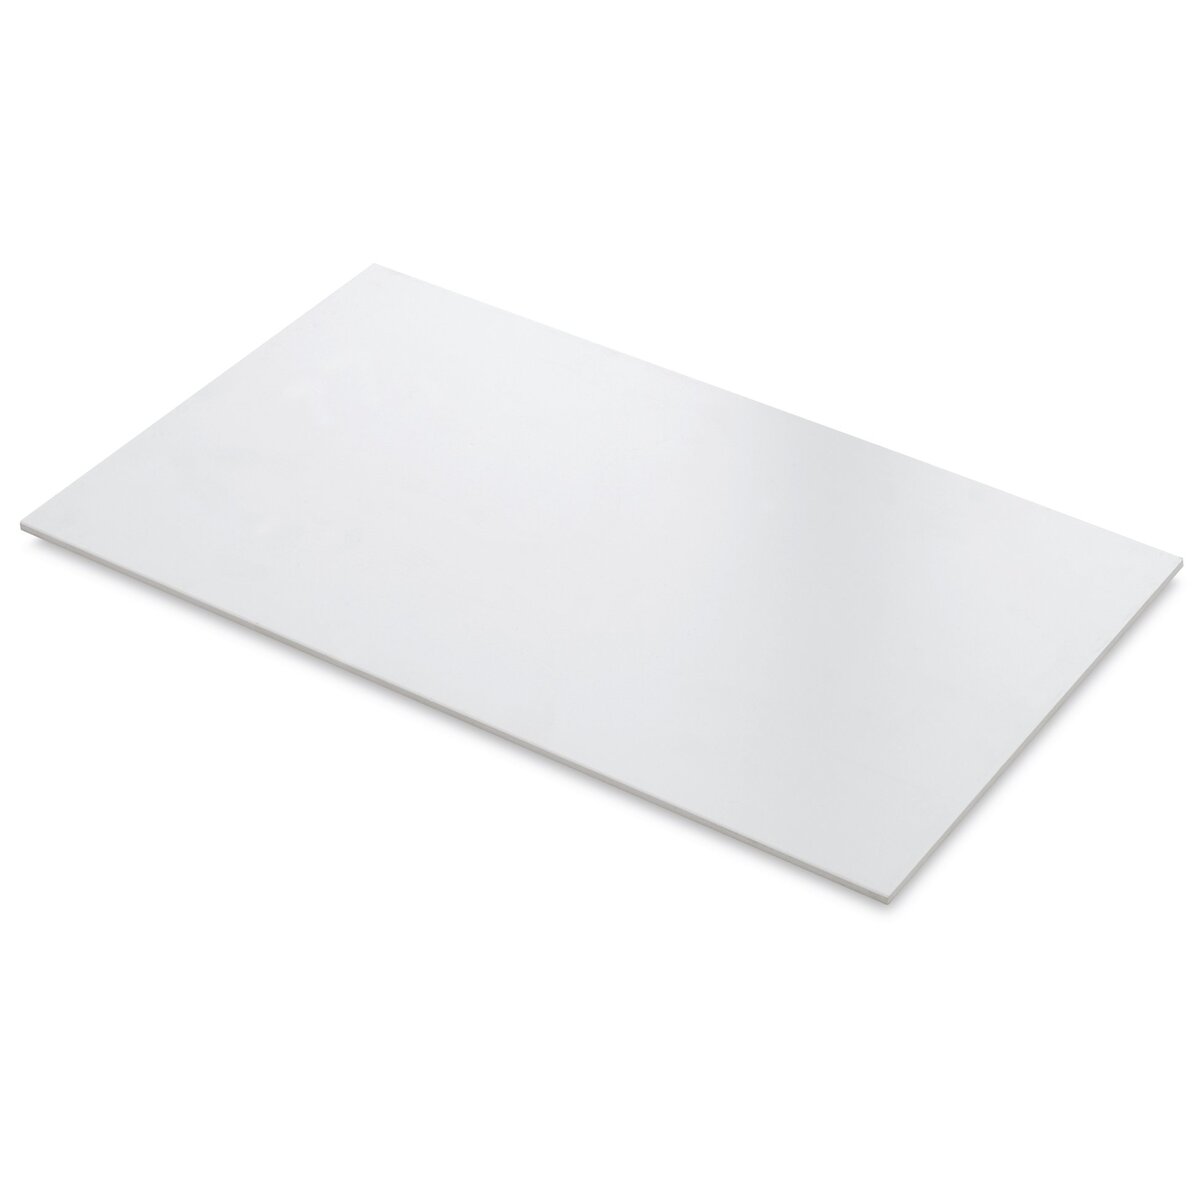 Package of 6 WHITE STYRENE PLASTIC SHEET .010" THICK 7" X 12" 